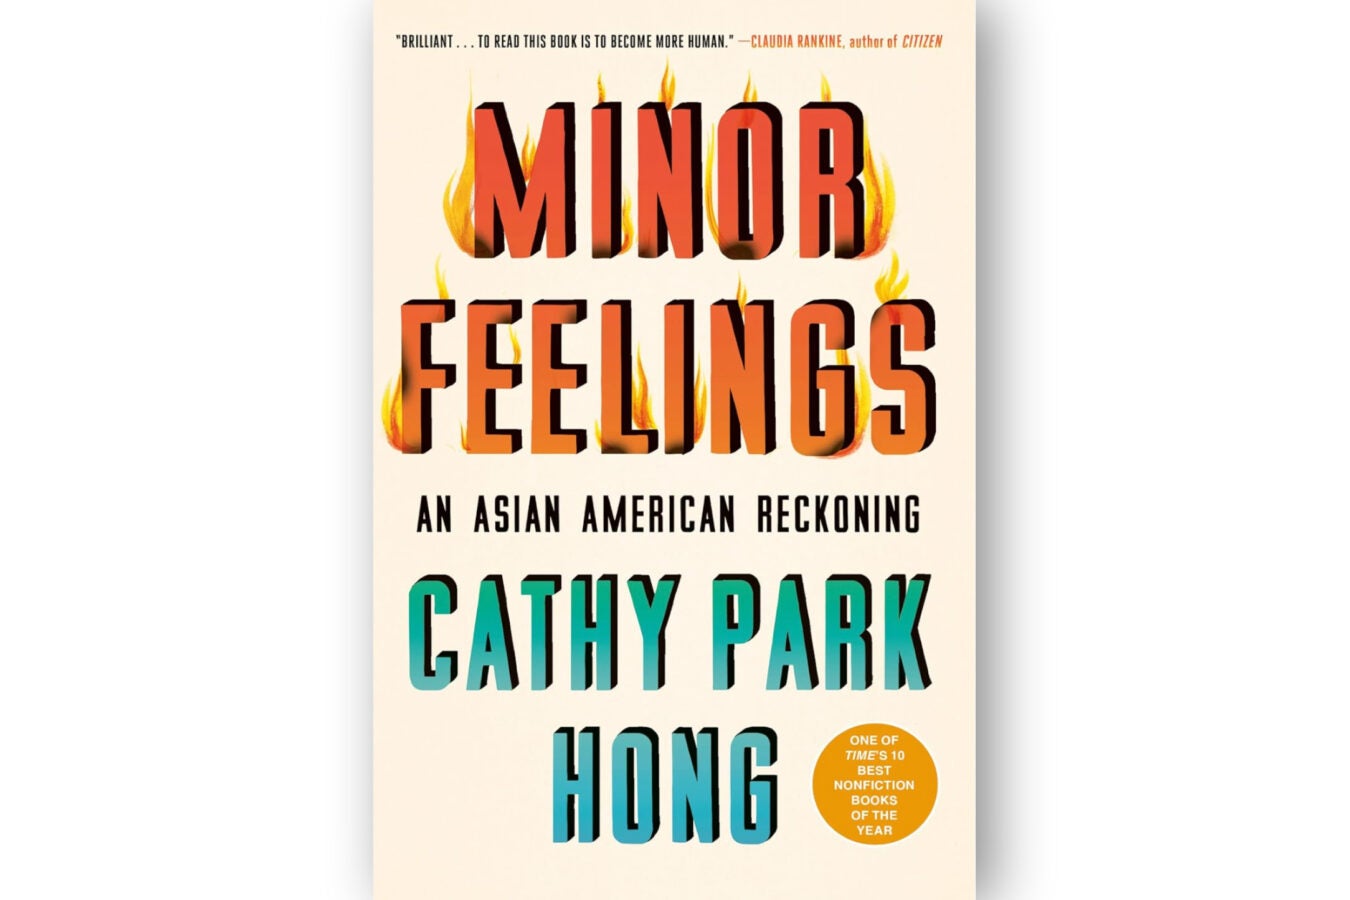 Book cover: "Minor Feelings" by Cathy Park Hong.